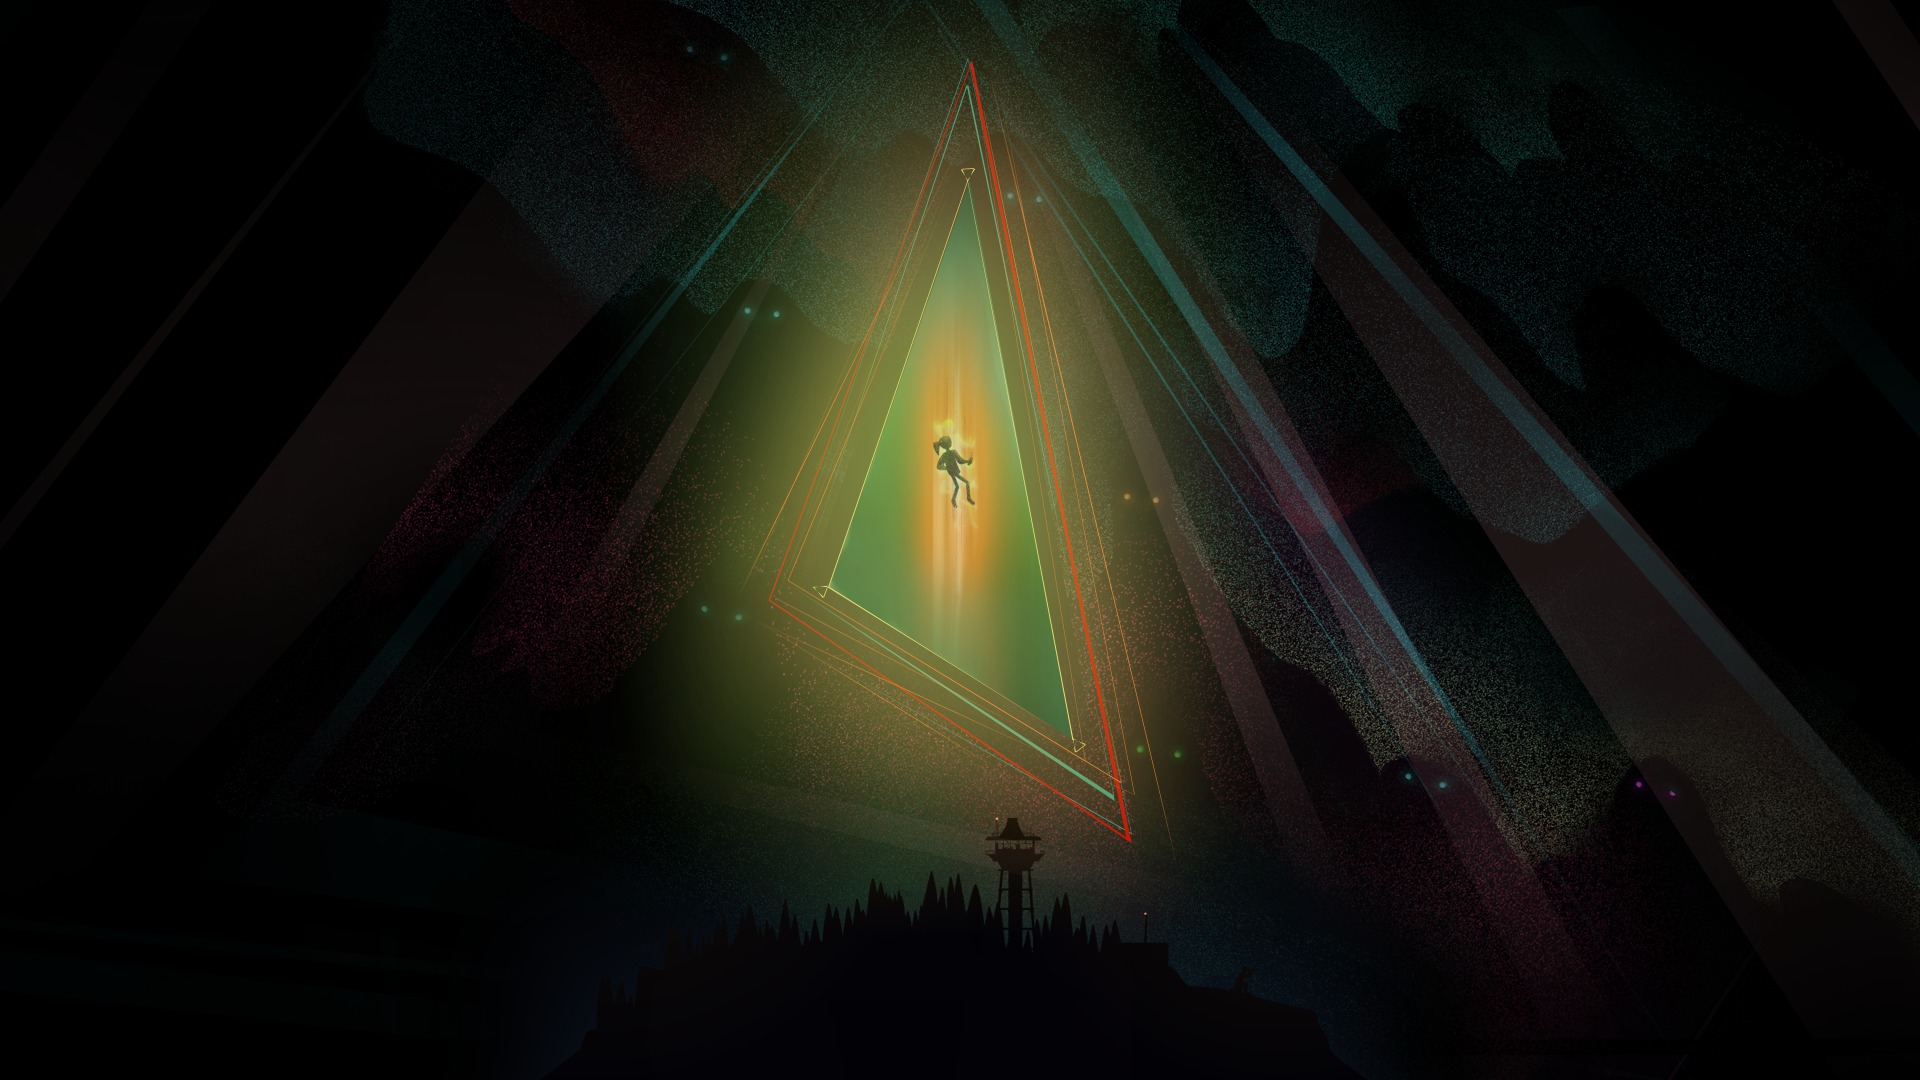 download oxenfree 2 xbox one